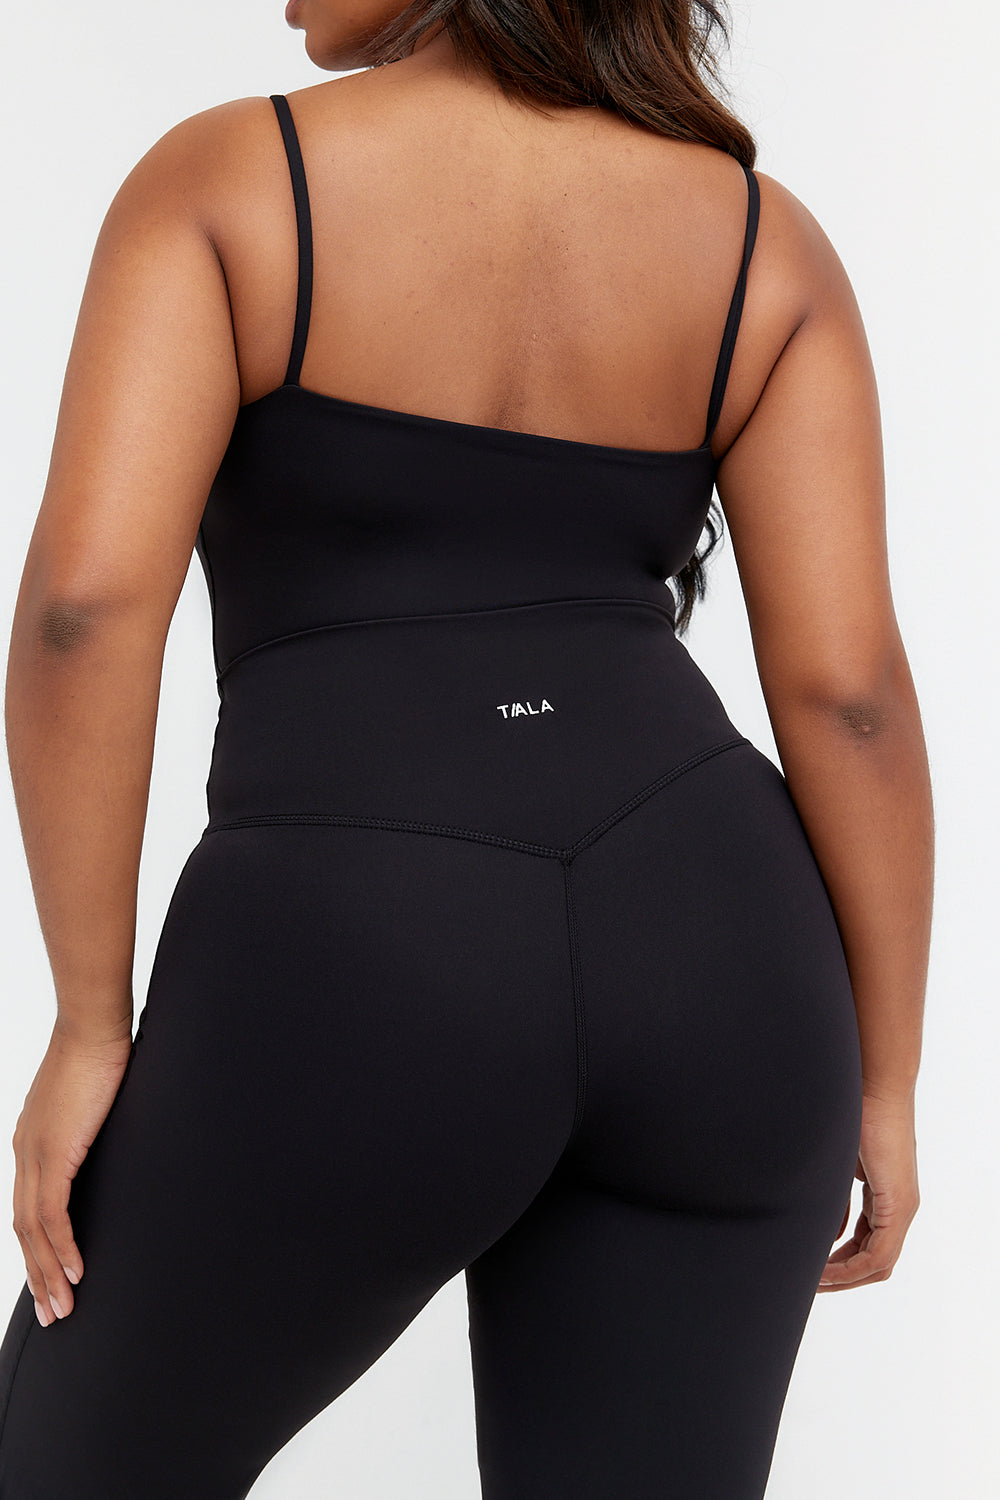 The Dayna wide leg yoga pants feature extra high waist and ankle